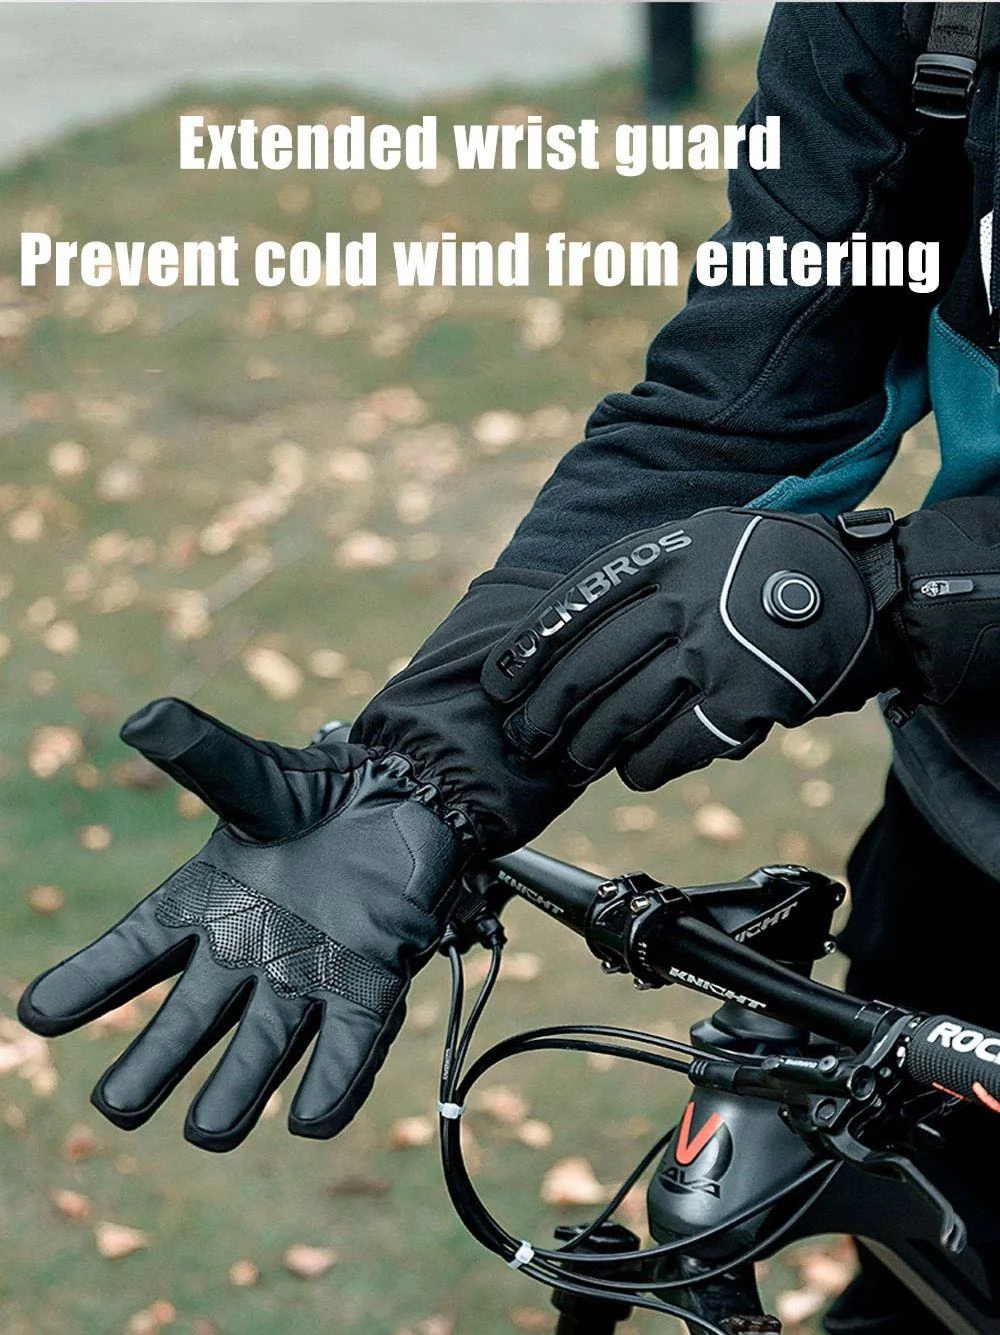 ROCKBROS S278 Heating Gloves for Cycling, Touchscreen Motorcycle Bicycle Breathable Waterproof Gloves - M/L/XL